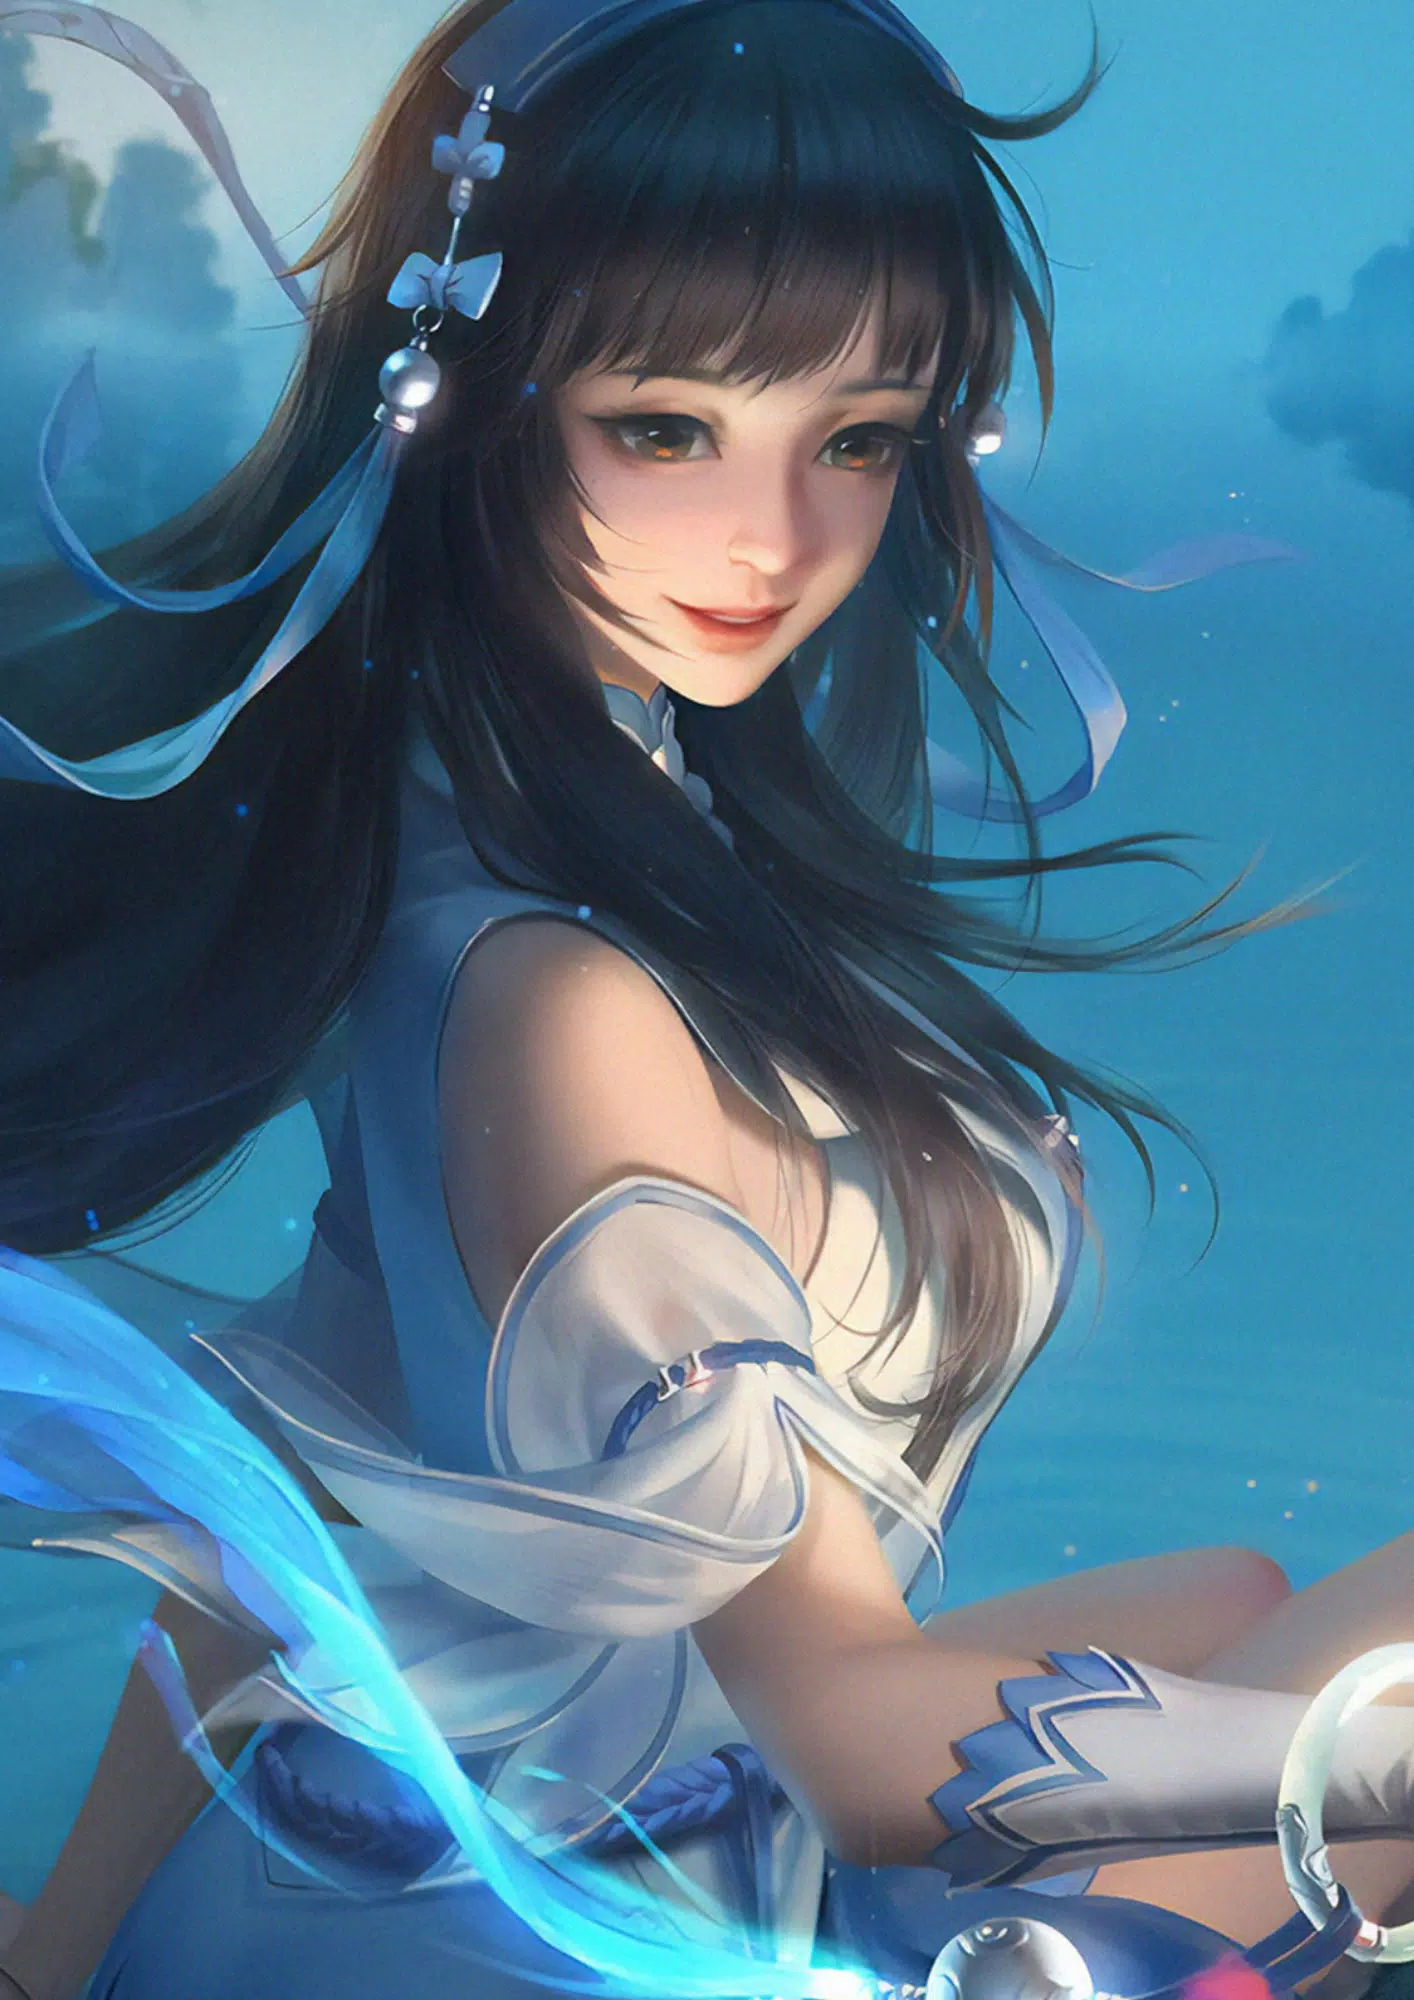 Anime Wallpapers Blue HD-4K APK for Android Download